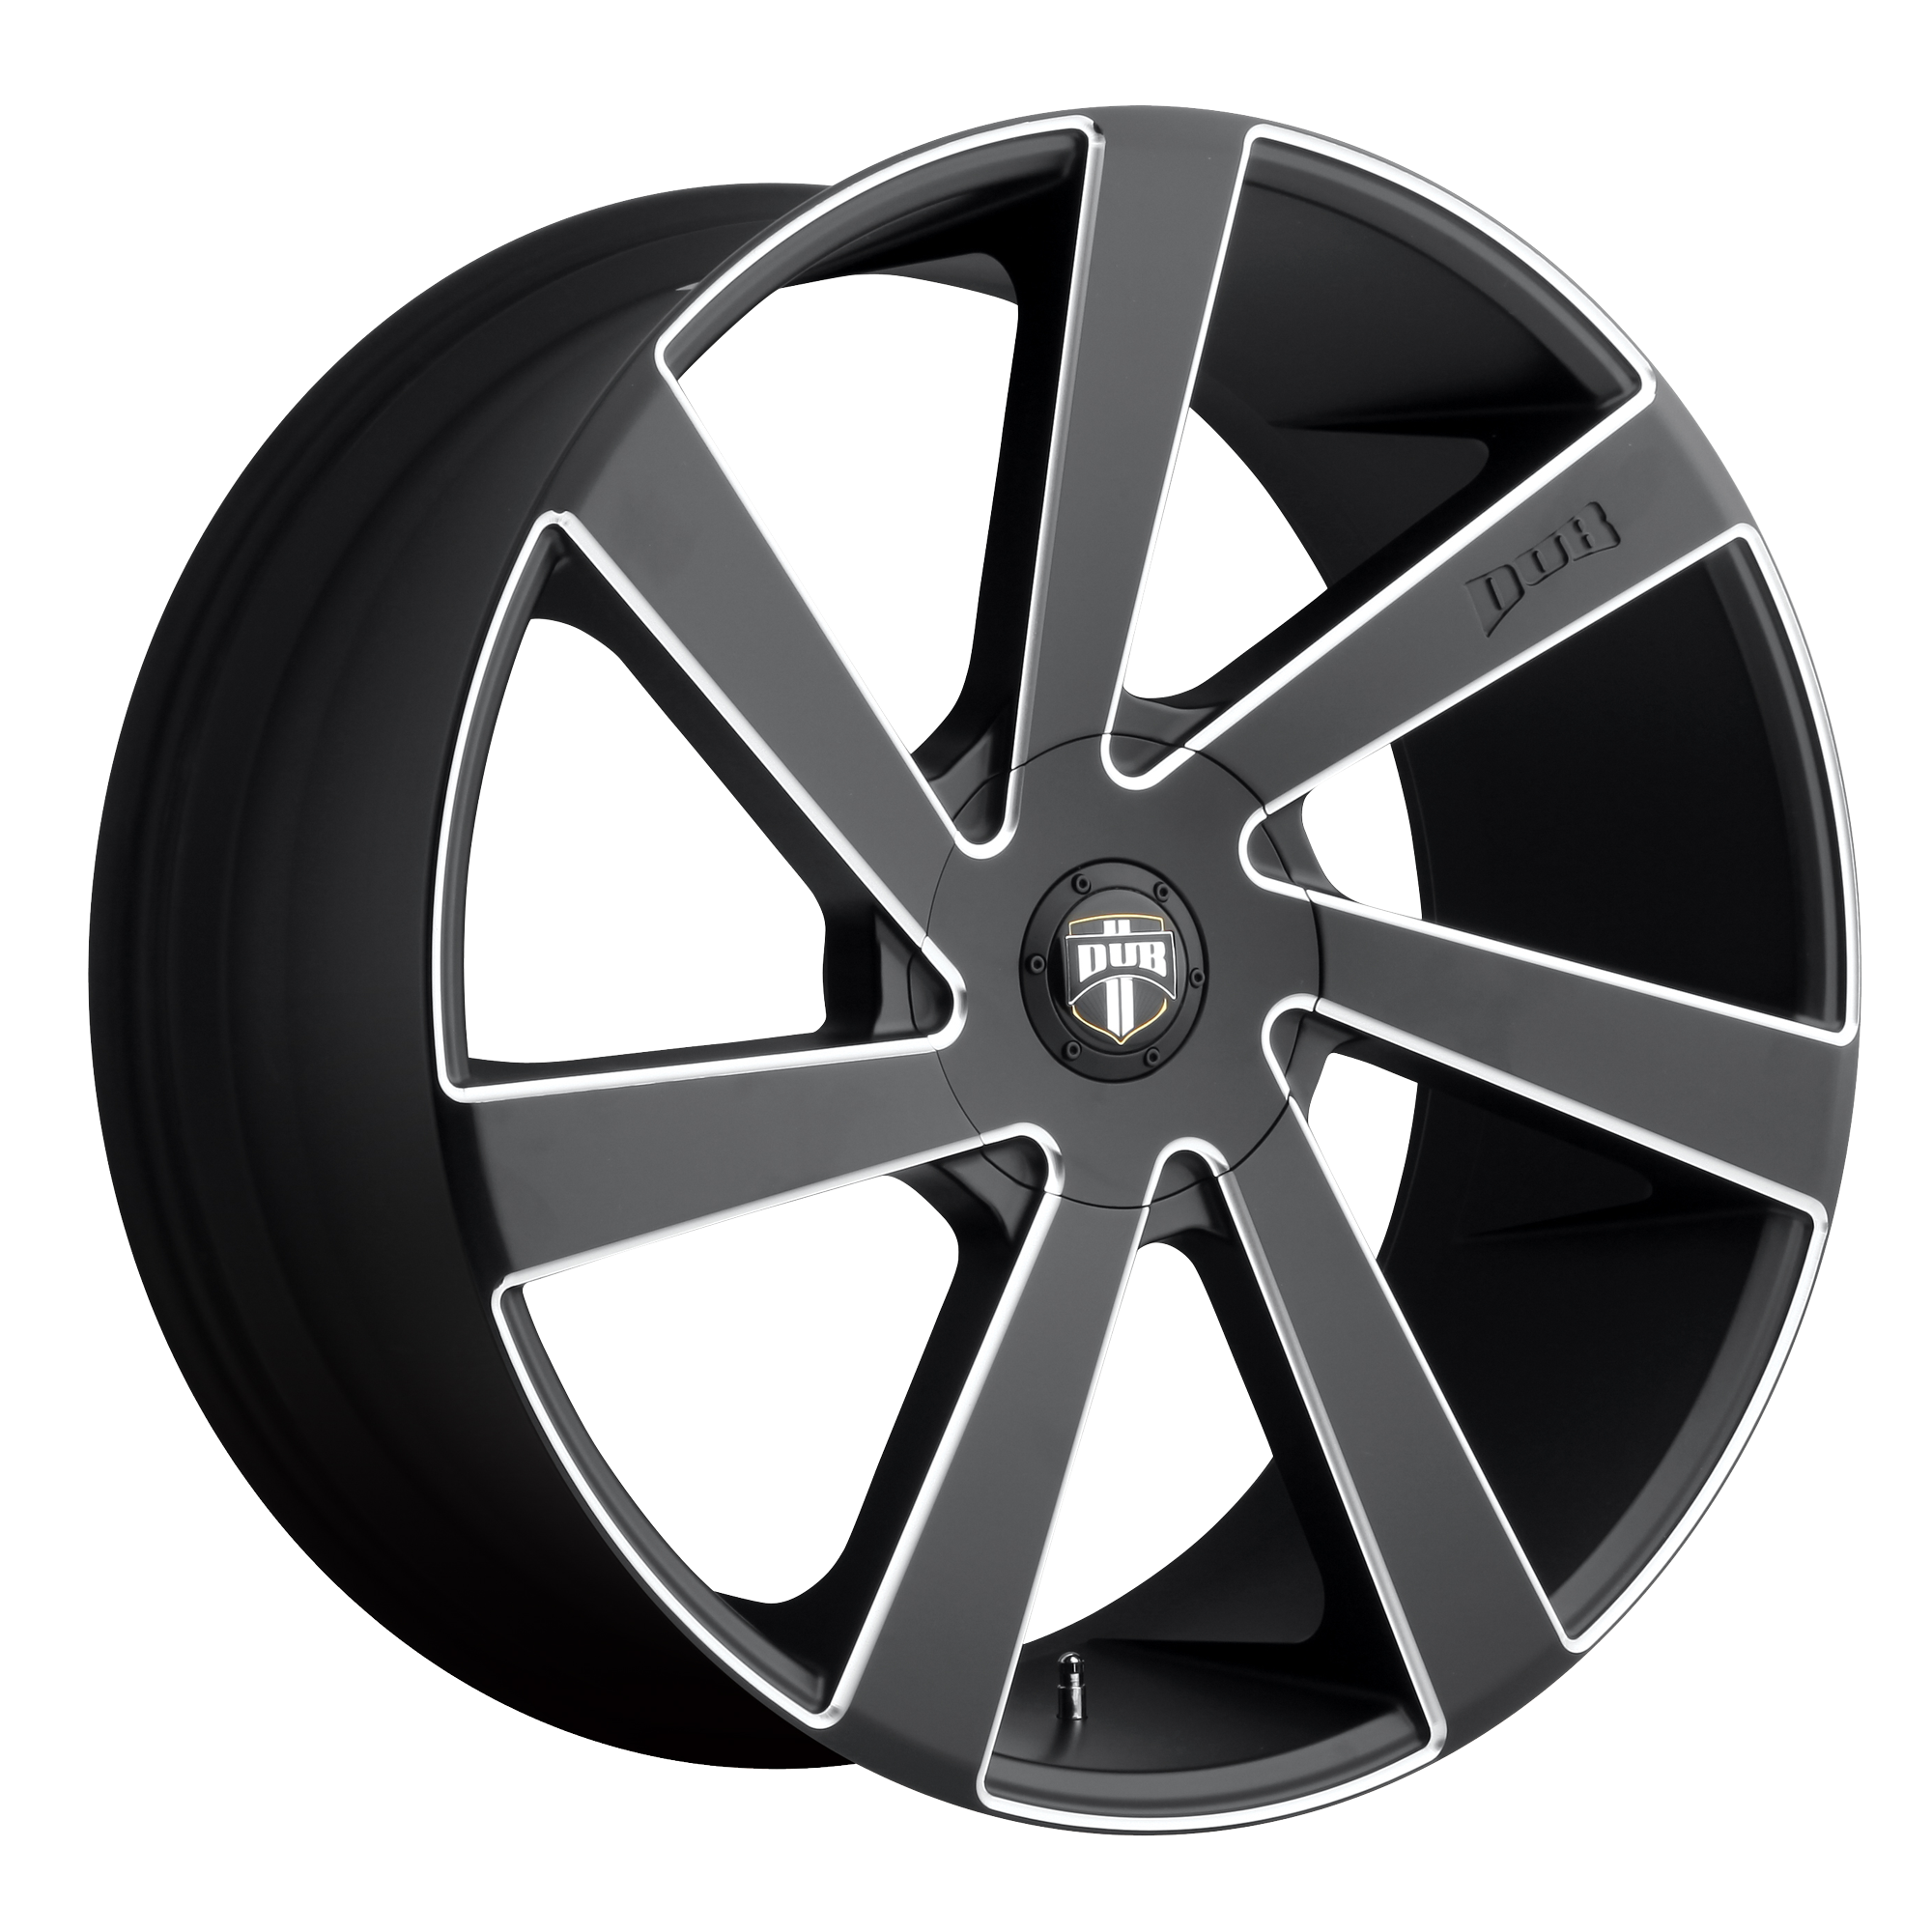 DIRECTA 22x9.5 5x115.00/5x120.65 MATTE BLACK MILLED (15 mm) - Tires and Engine Performance